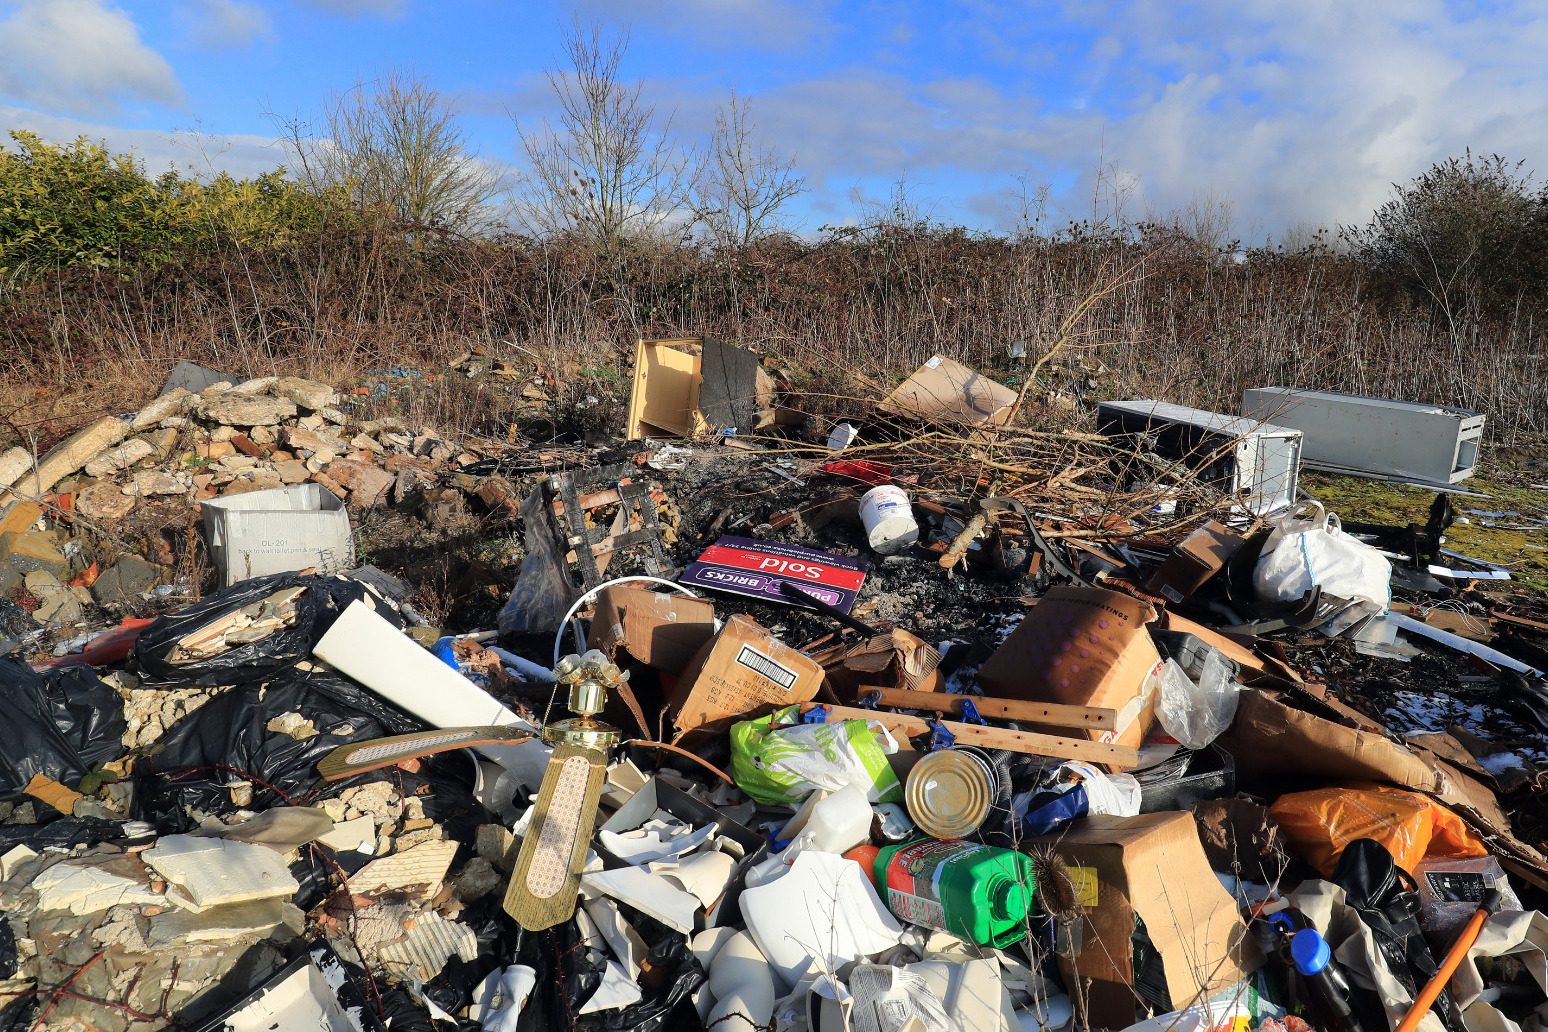 Fly-tipping cases in England surged by 16% during the pandemic 